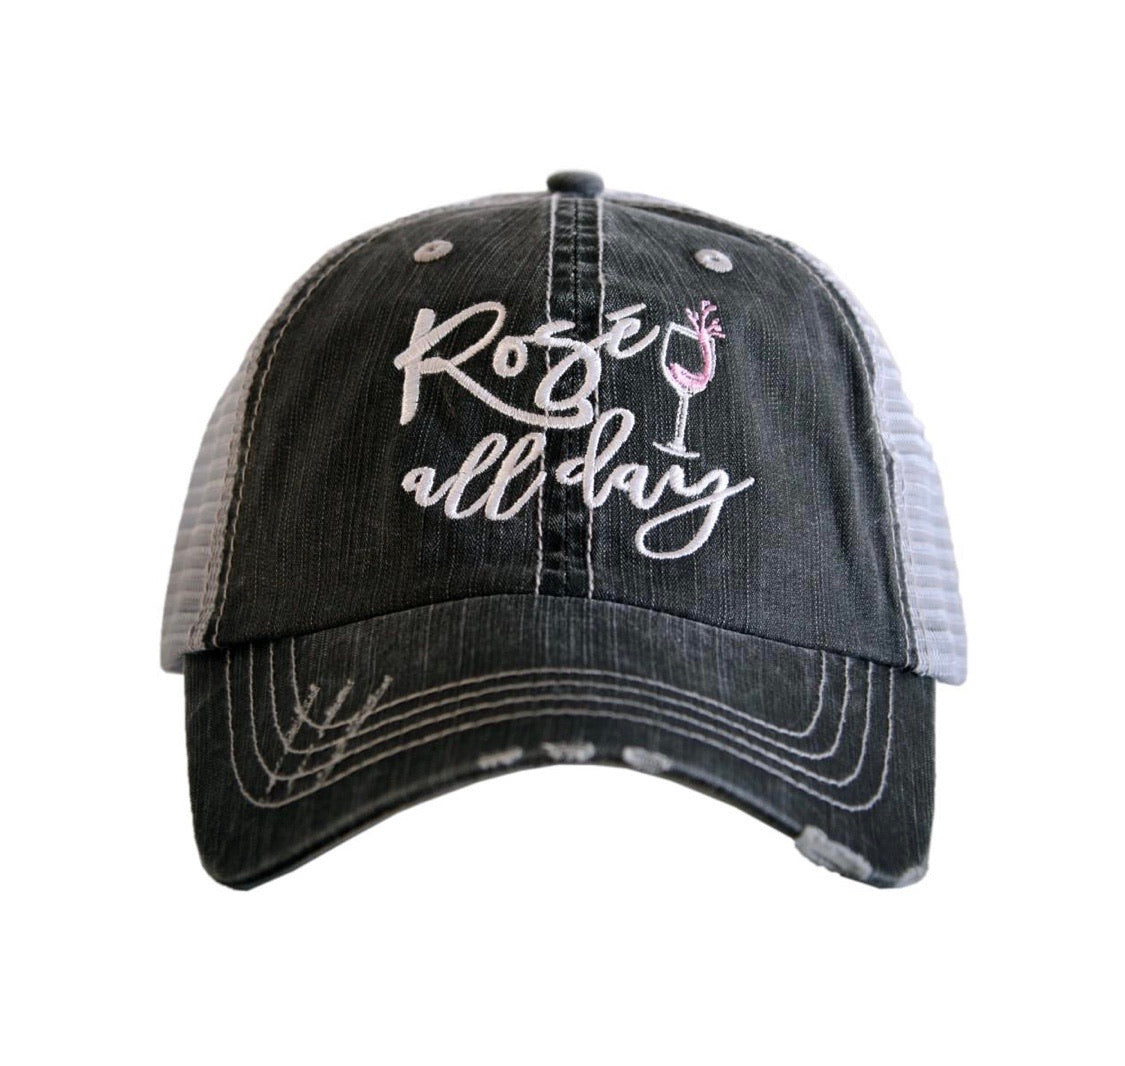 Hat { Rose all day } Gray • Embroidered letters and wine glass • Distressed trucker cap • Adjustable Vel cro with hole for pony - Stacy's Pink Martini Boutique